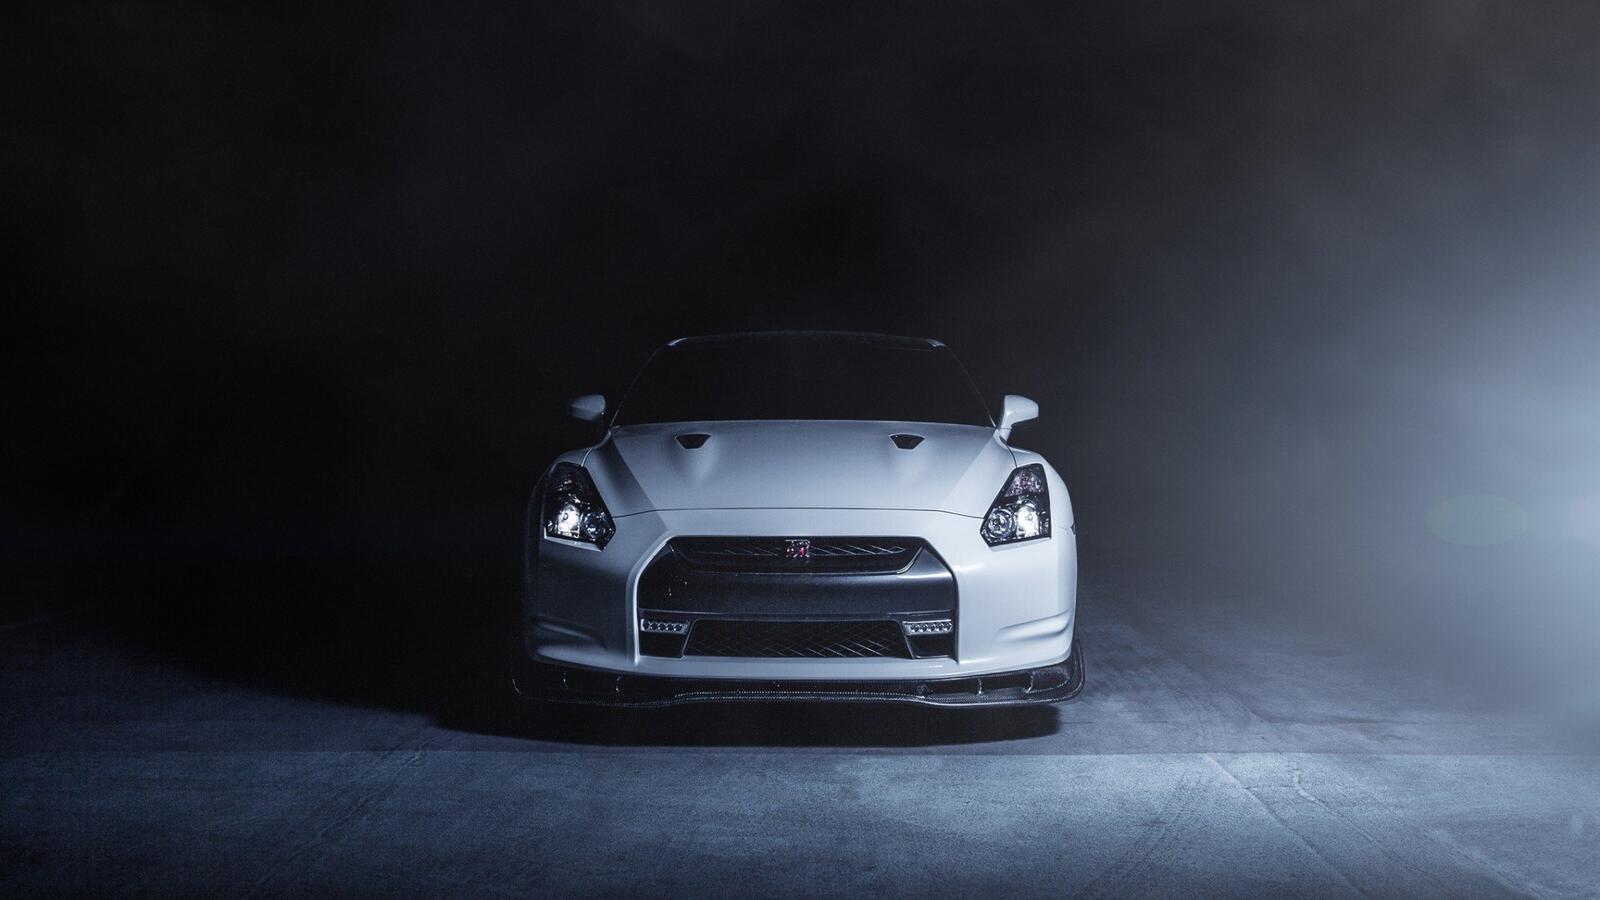 Free photo A white Nissan gtr in a smoky room.